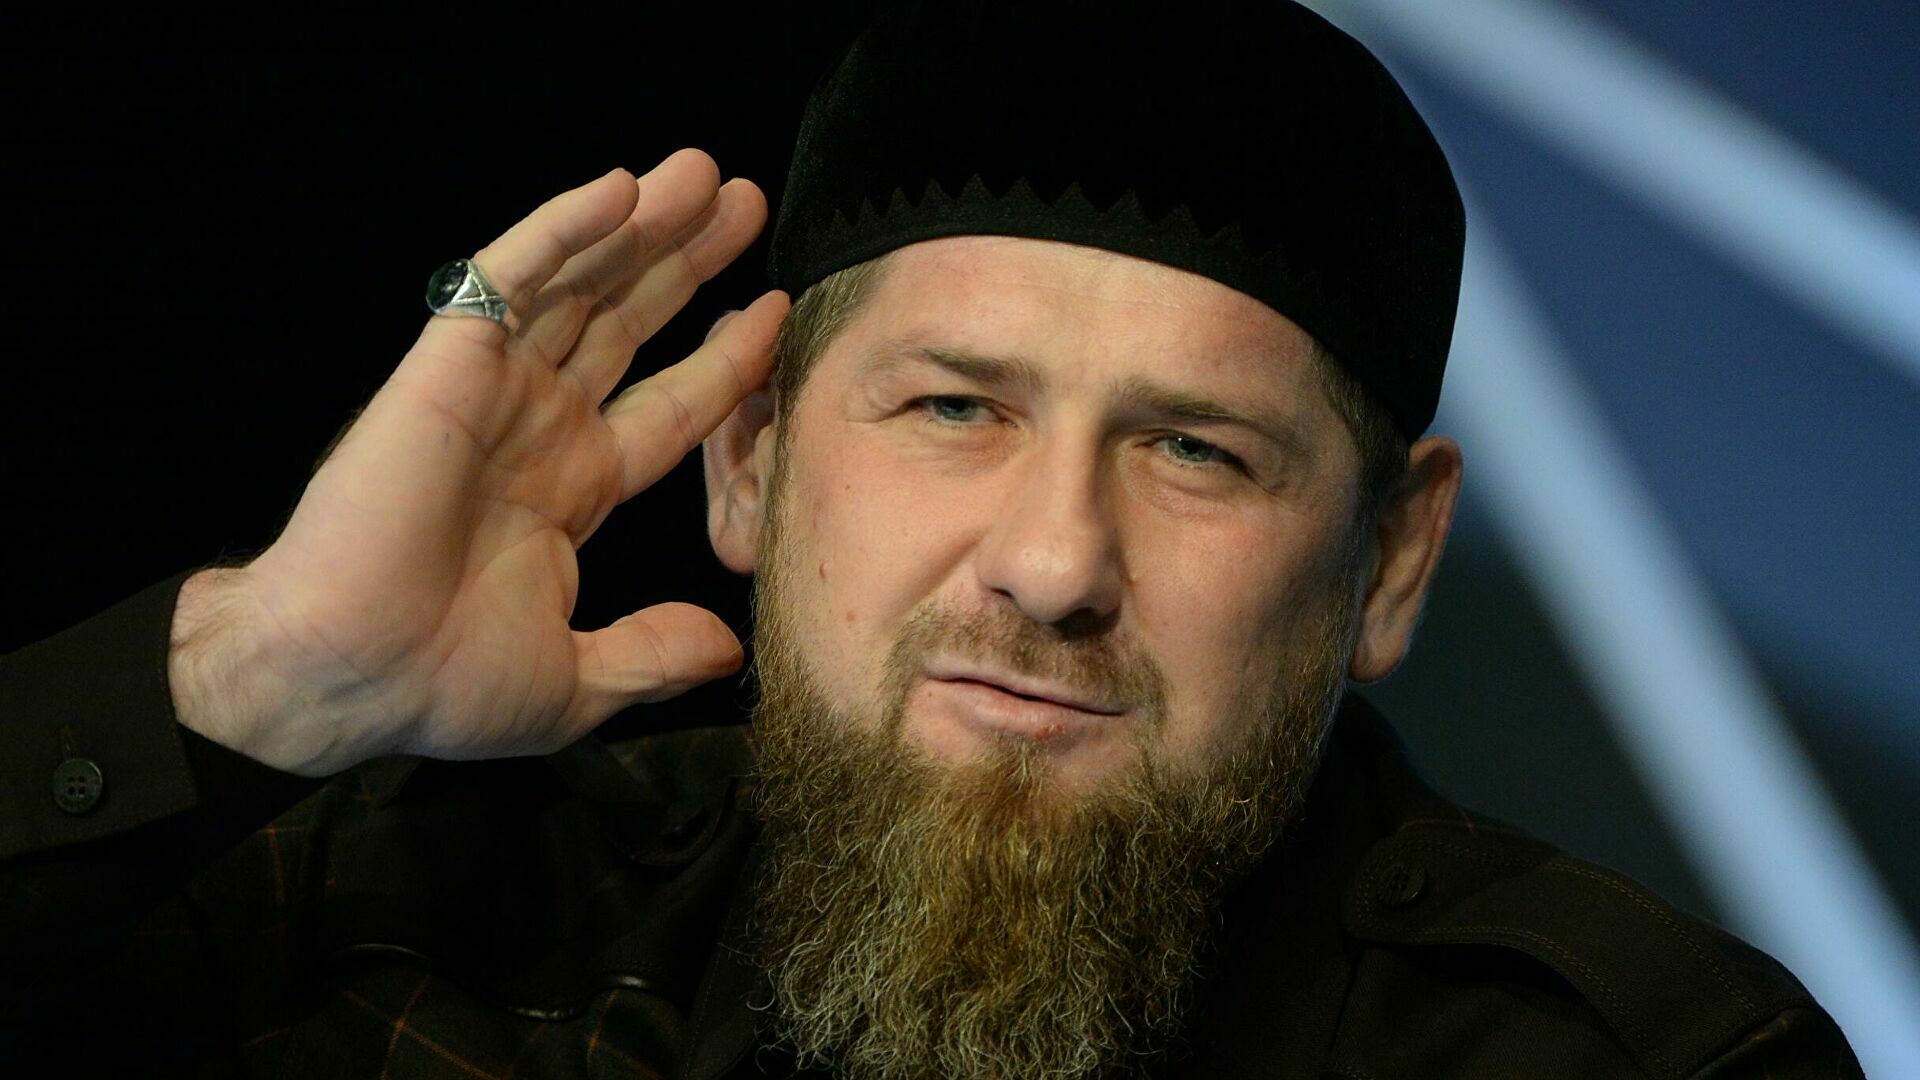 Kadyrov won 99.63% of votes in the elections for the head of Chechnya